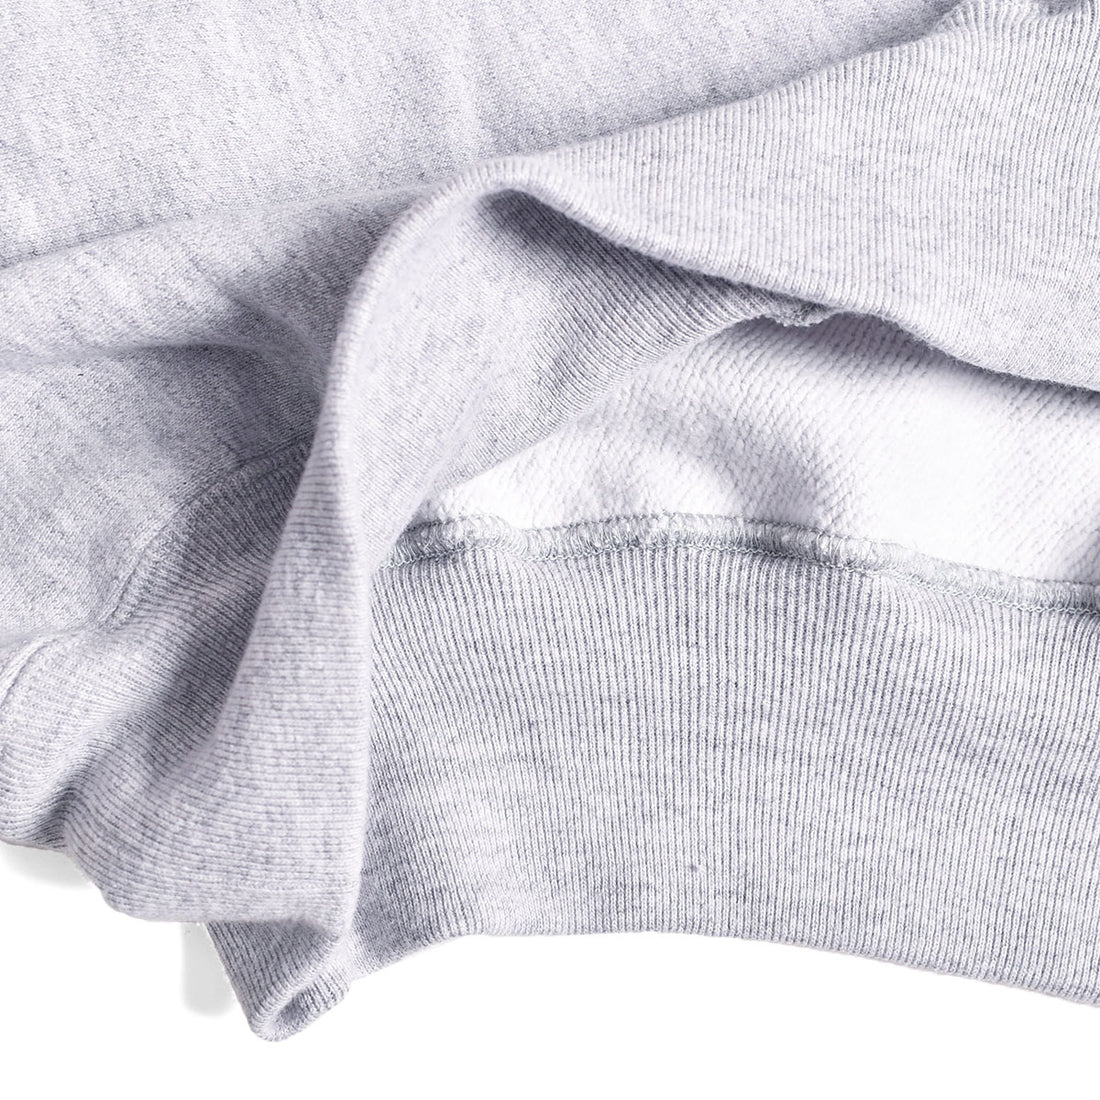 [READYMADE]HOODIE SMILE/GRAY(RE-CO-GY-00-00-245)